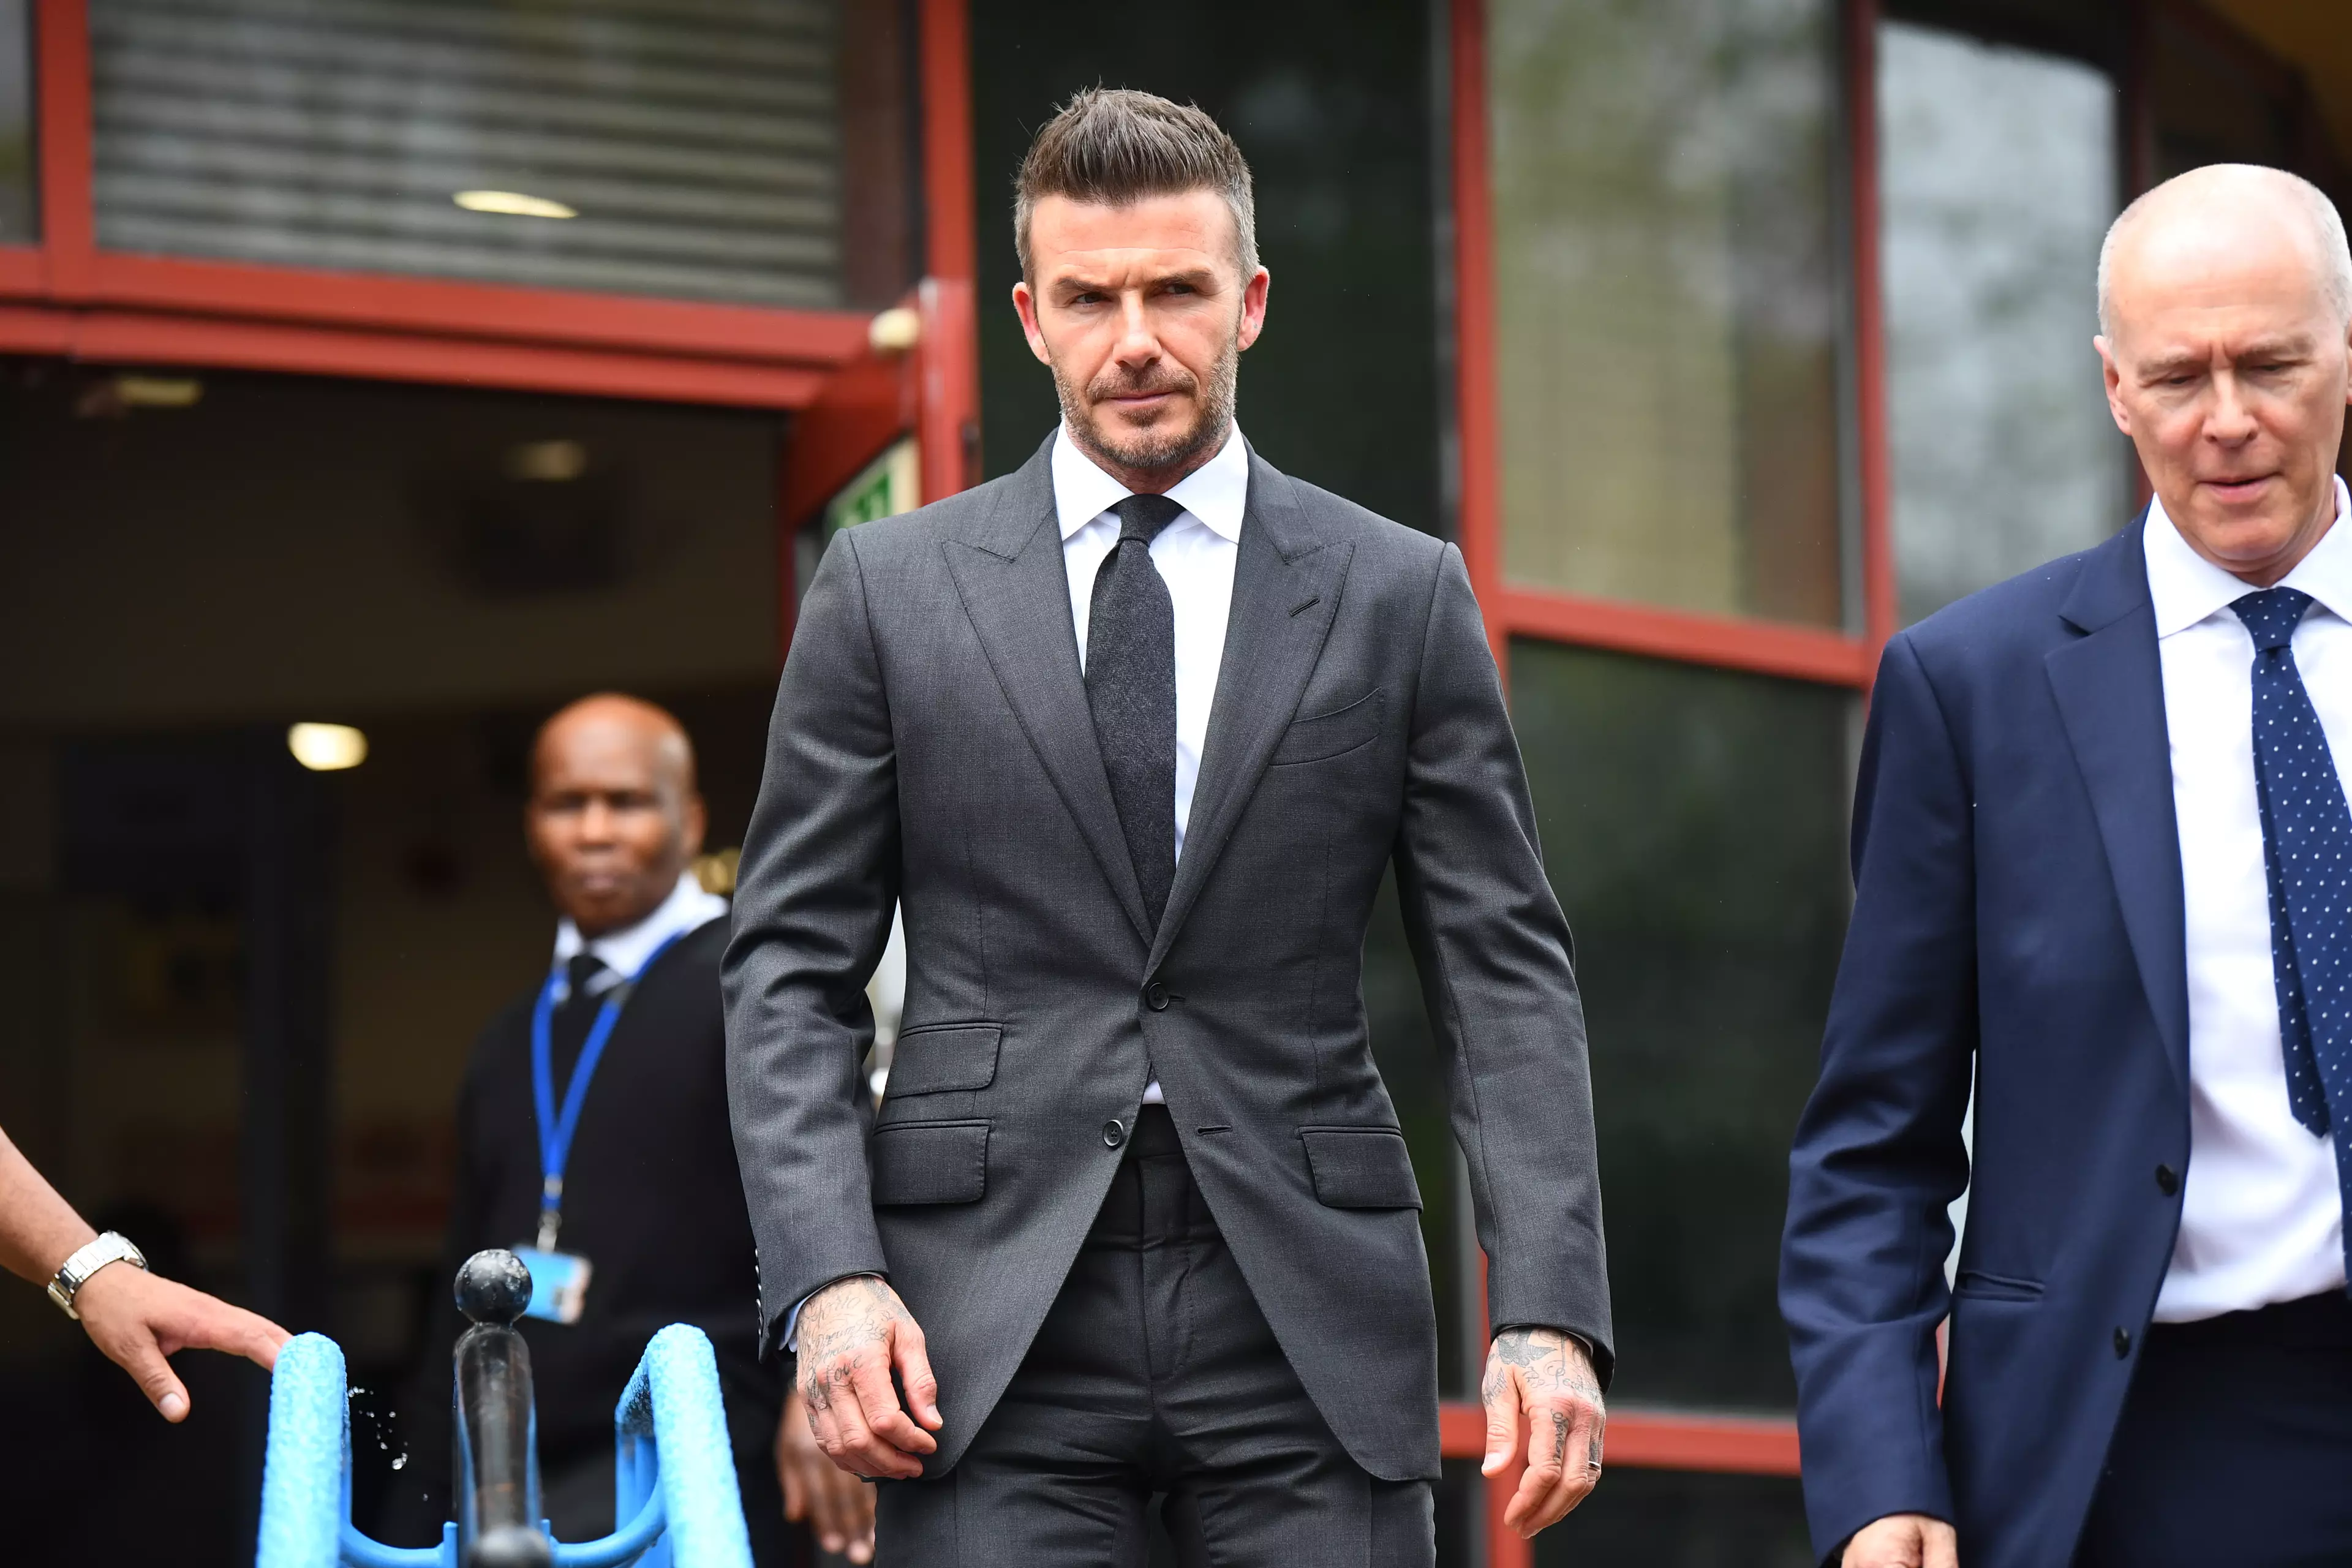 Beckham was given six points on his licence and banned from driving for six months.